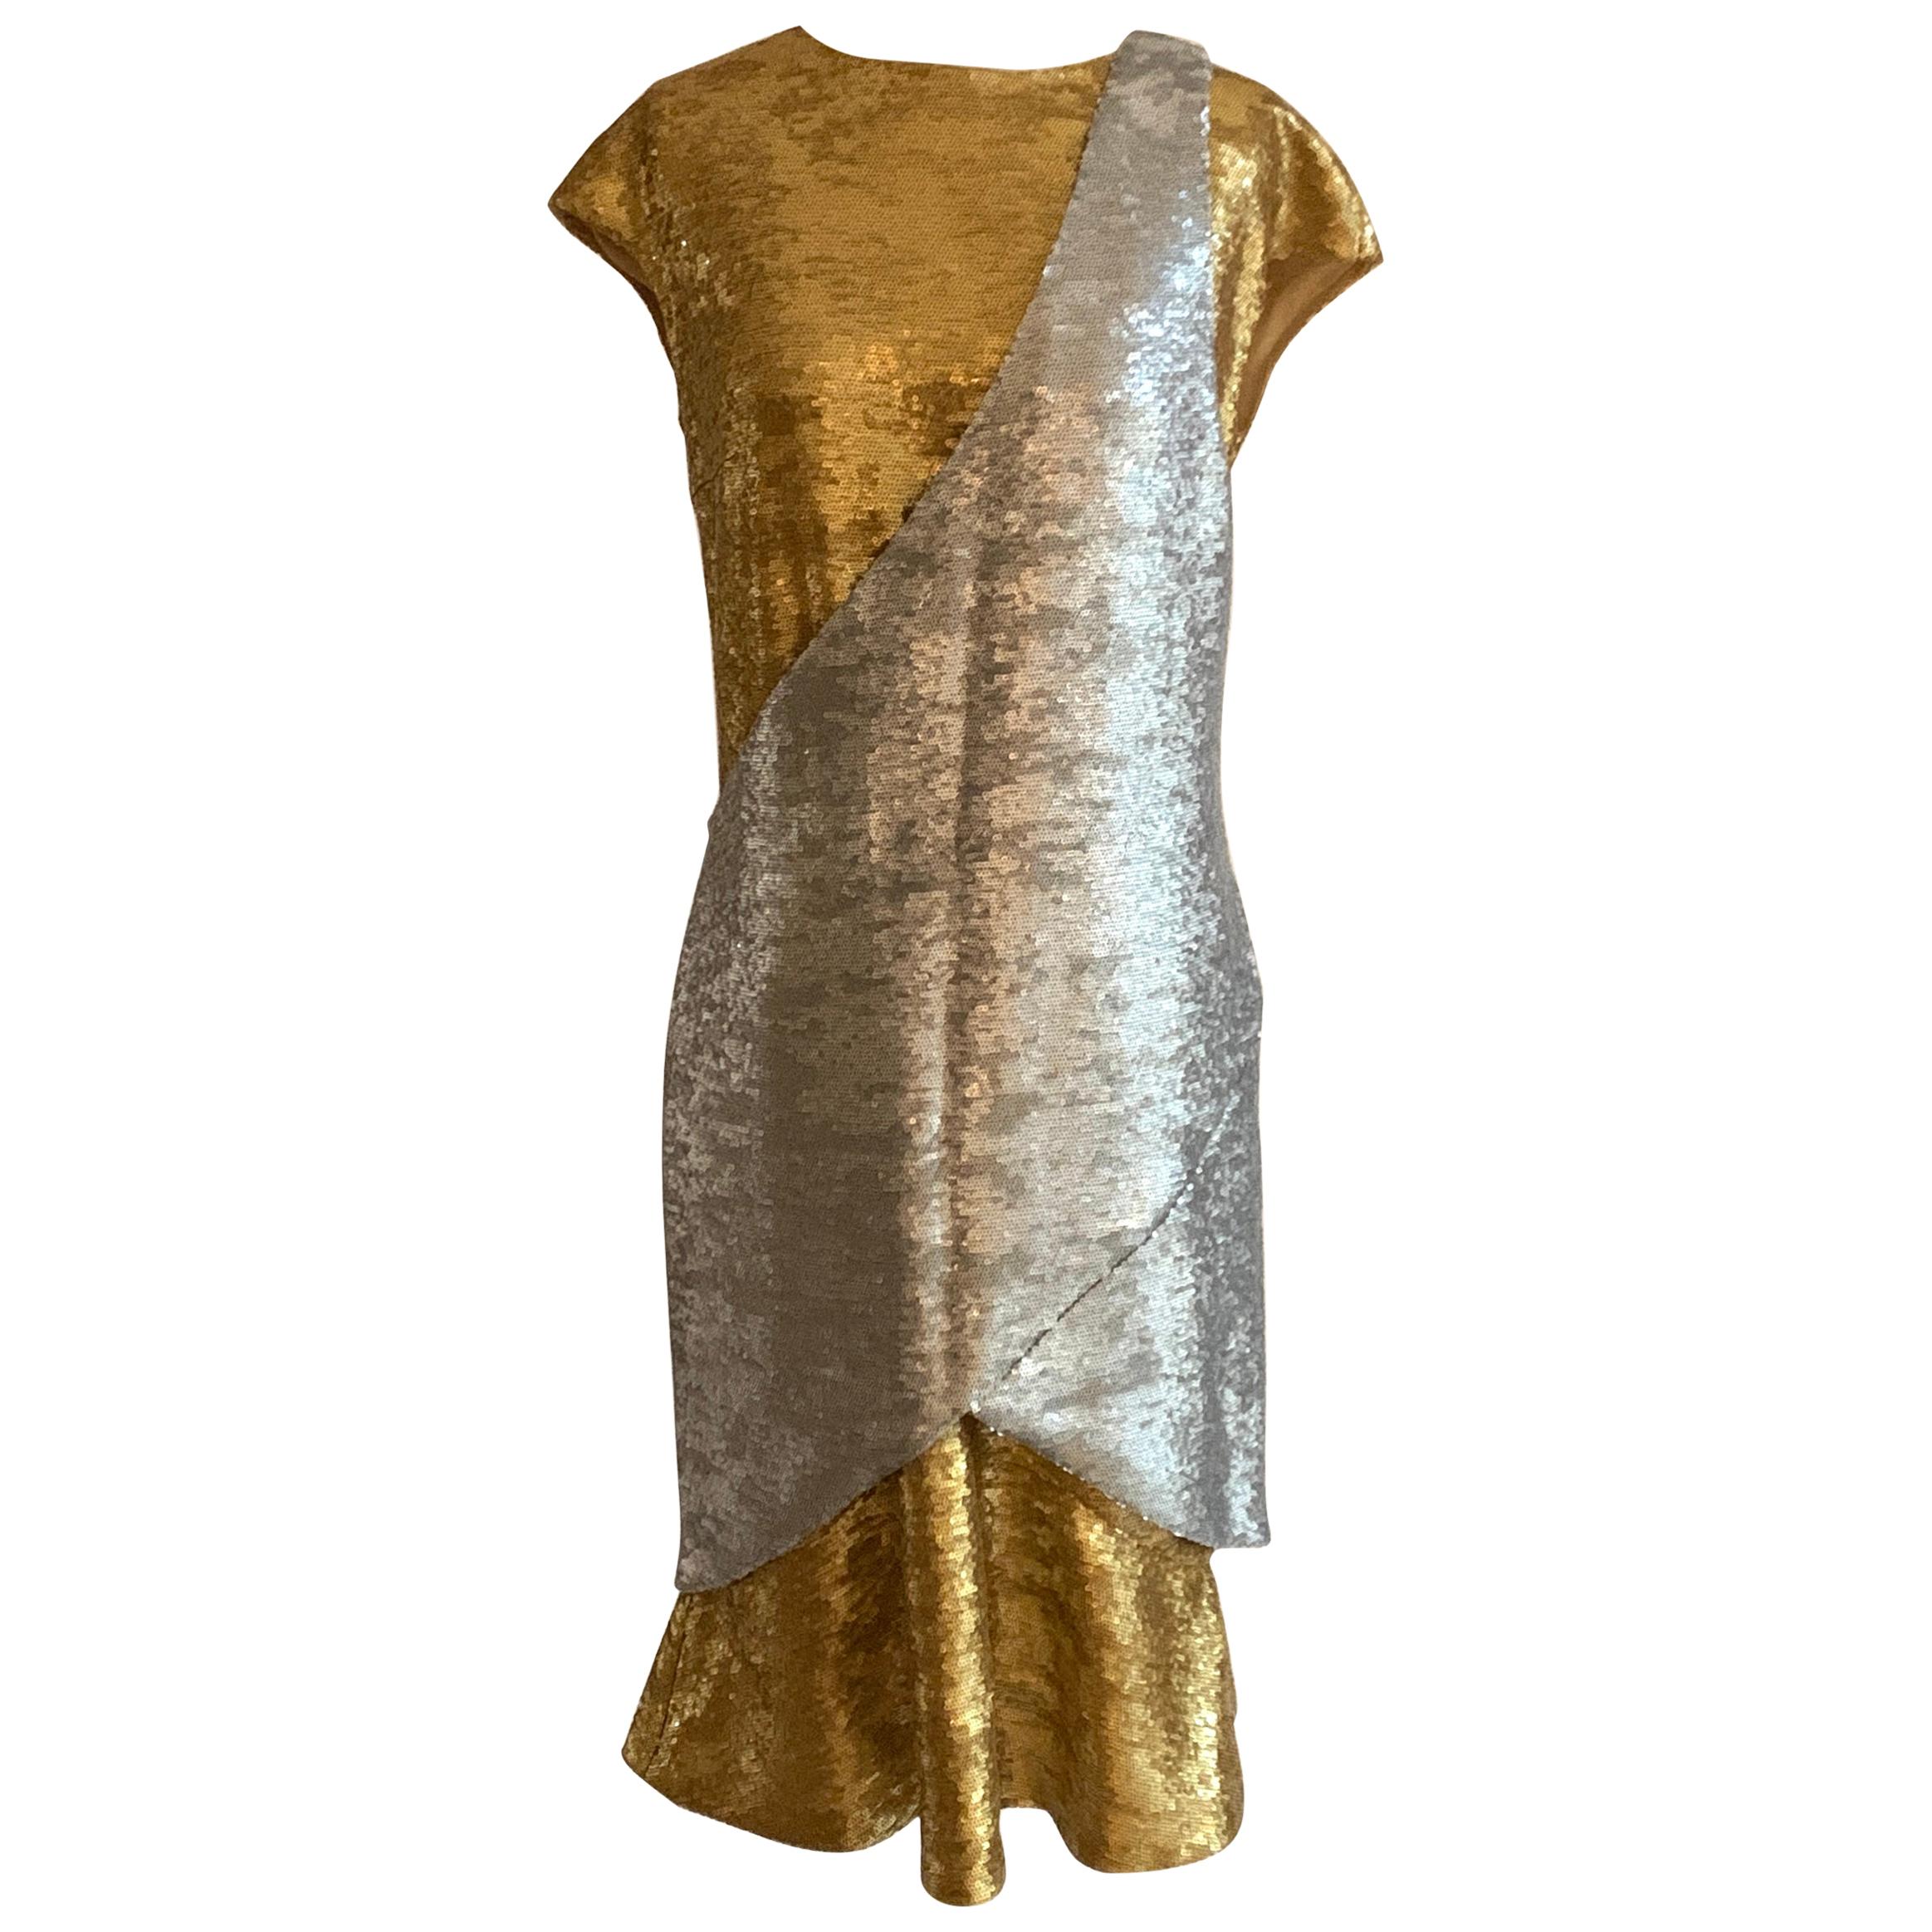 Chanel 2012 Runway Silver & Gold Sequin Sari Inspired Two Piece Dress